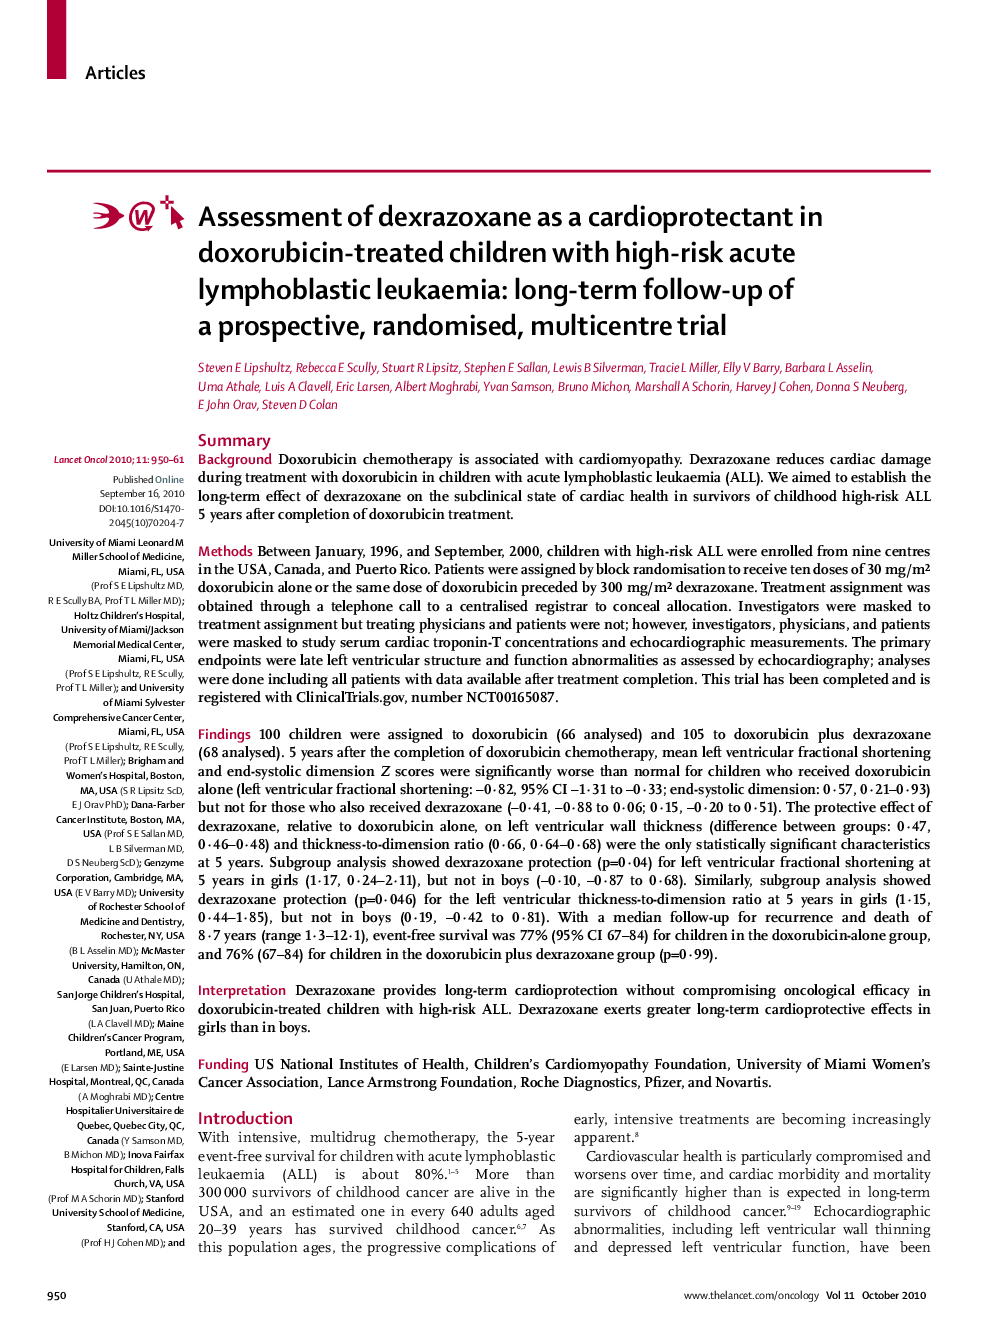 Assessment of dexrazoxane as a cardioprotectant in doxorubicin-treated children with high-risk acute lymphoblastic leukaemia: long-term follow-up of a prospective, randomised, multicentre trial